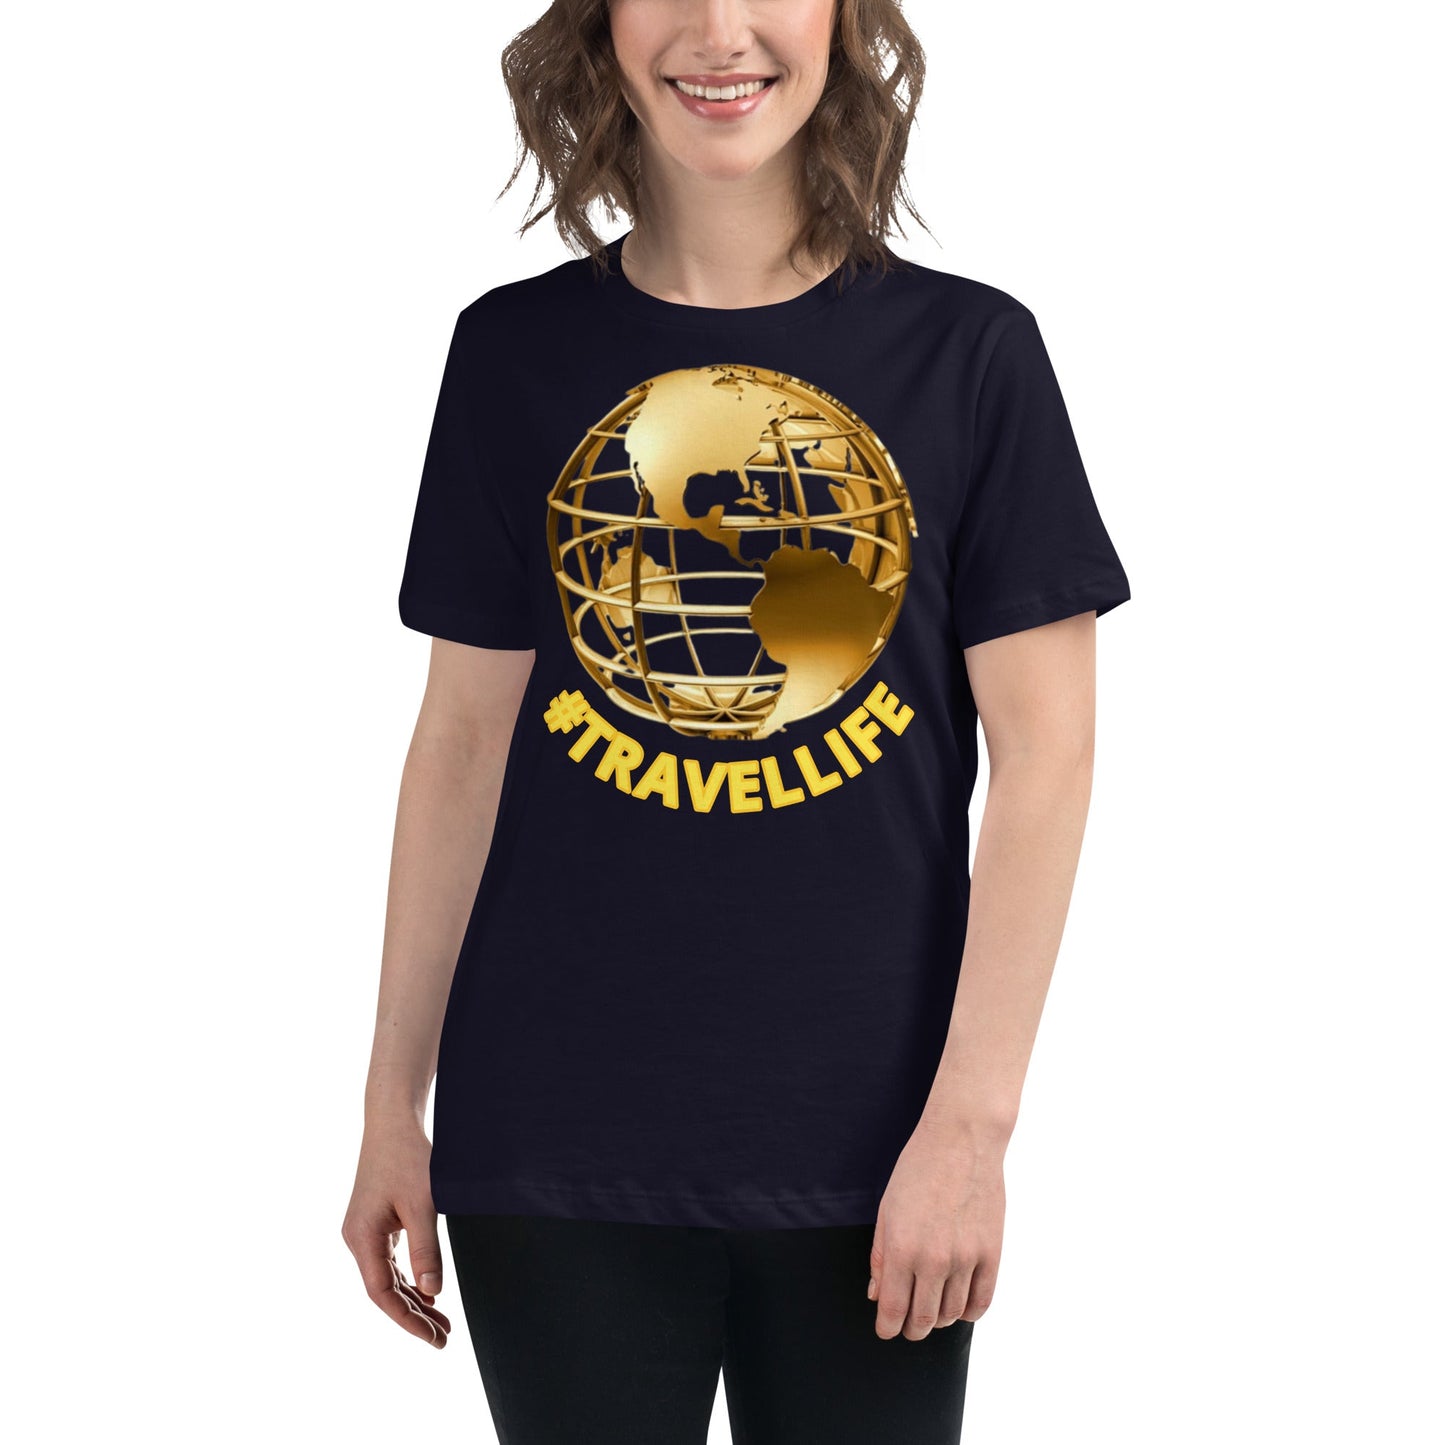 #Travellife World Women's Black Relaxed T-Shirt Large Gold Text 2X+